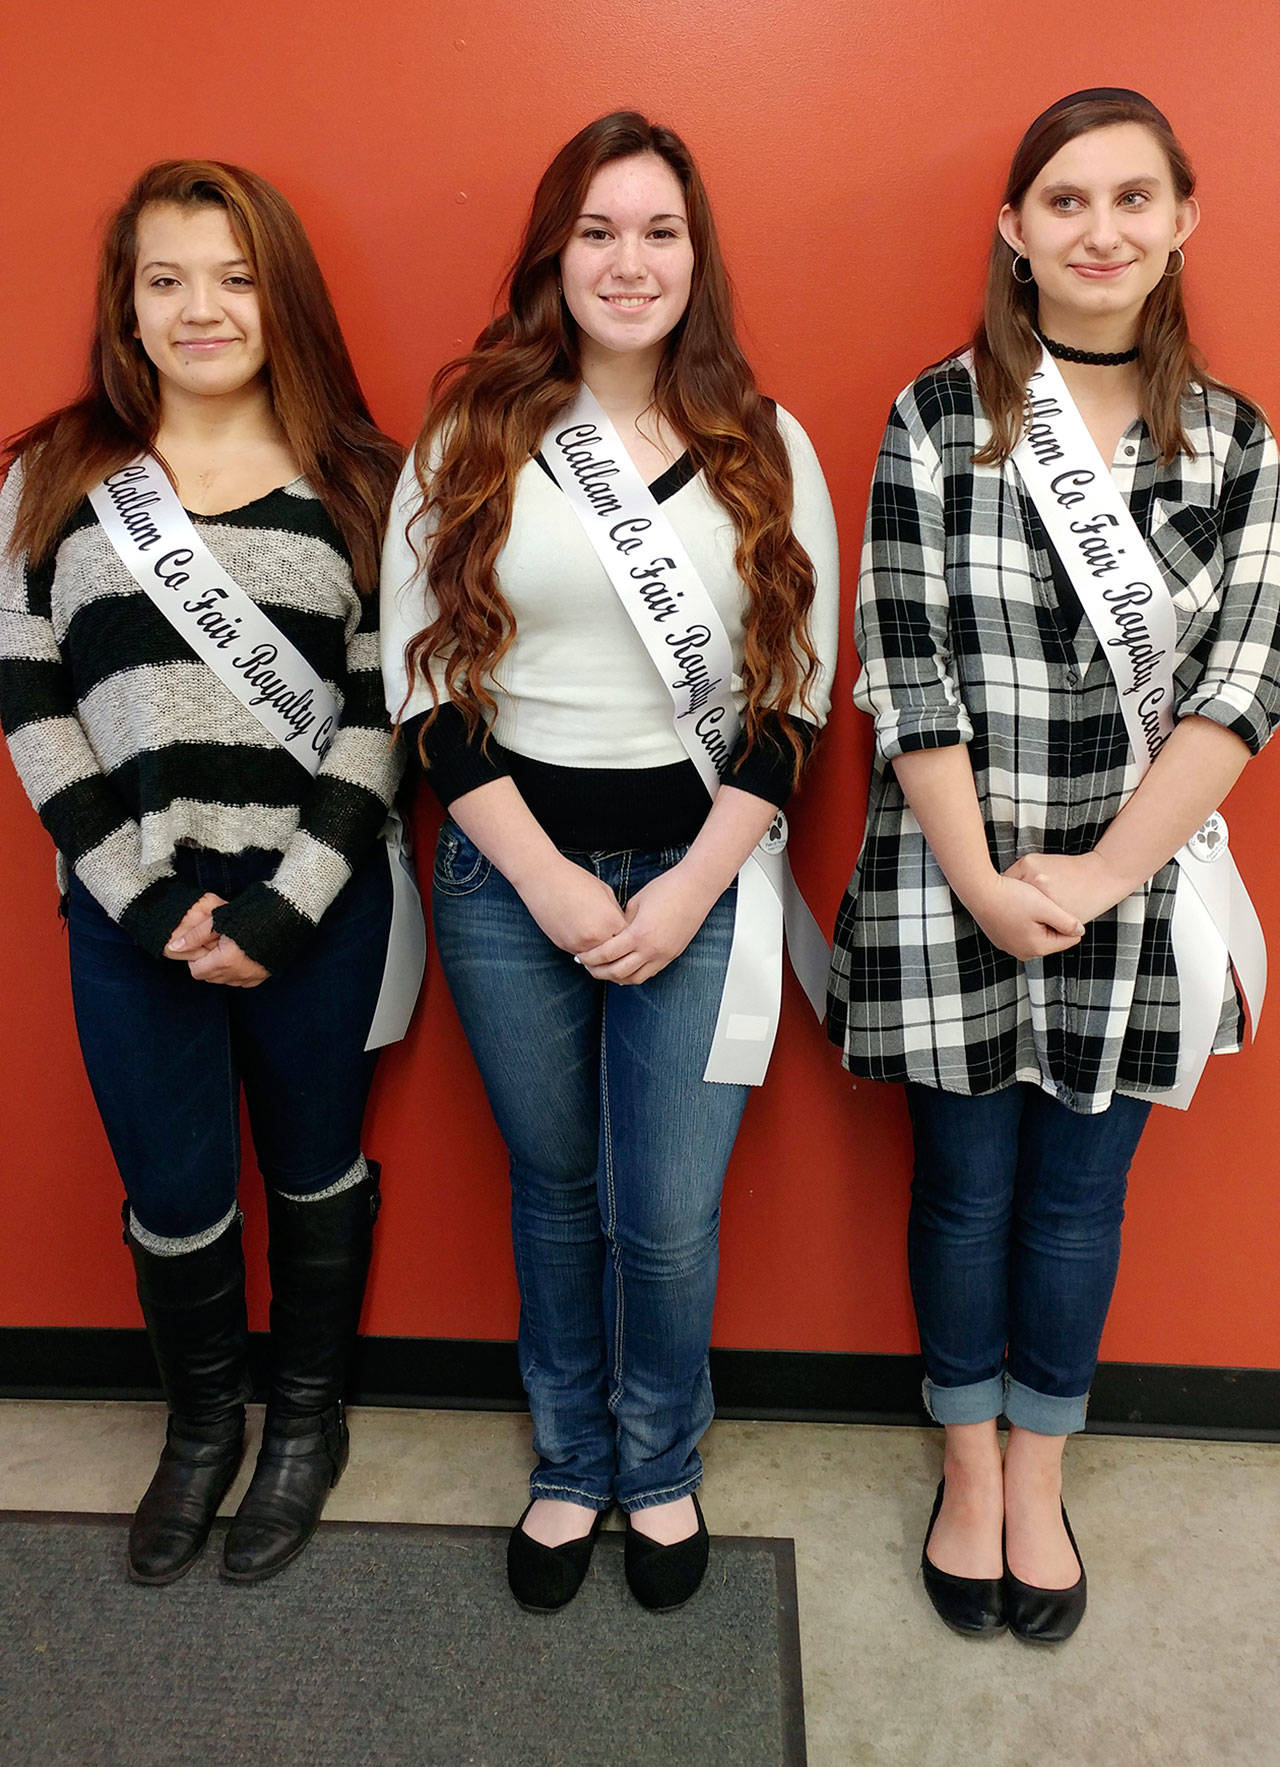 The Clallam County Fair royalty candidates are, from left, Sammi Bates of Port Angeles, Saydee Peters of Forks and Rebekah Parker of Sequim.